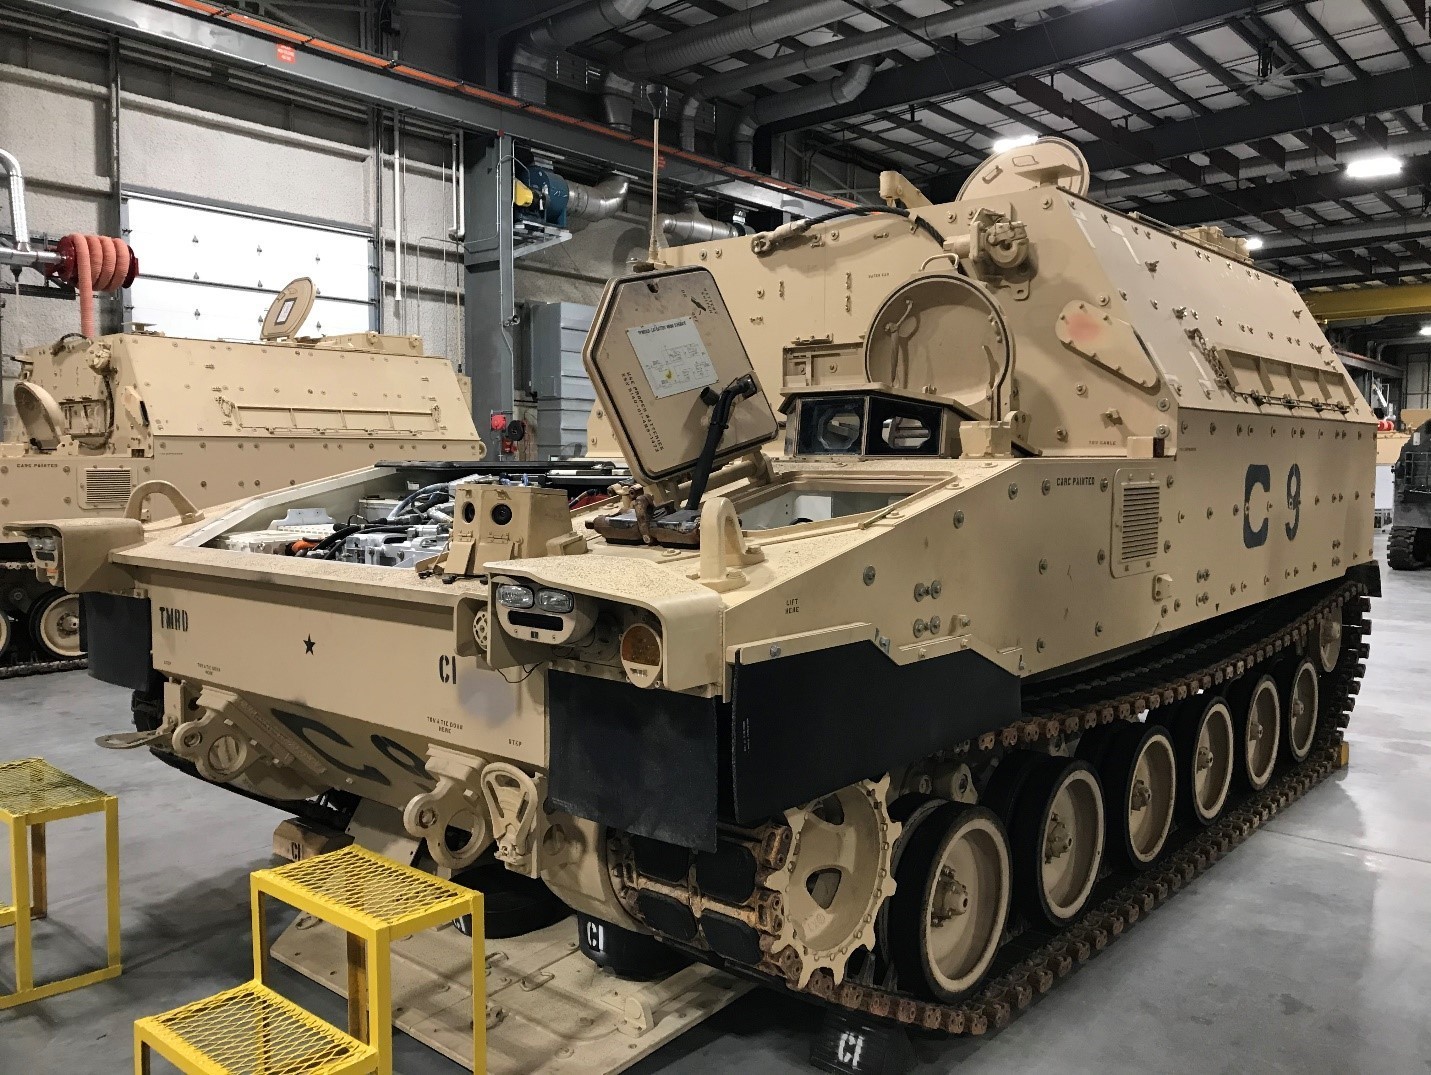 The M992A3 Field Artillery Ammunition Supply Vehicle (FAASV) Carrier Ammunition Tracked (CAT) in the maintenance bay at the U.S. Army Ordnance School, Fort Lee, Virginia. (Photo Credit: Sgt. 1st Class Christopher M. Robbins)